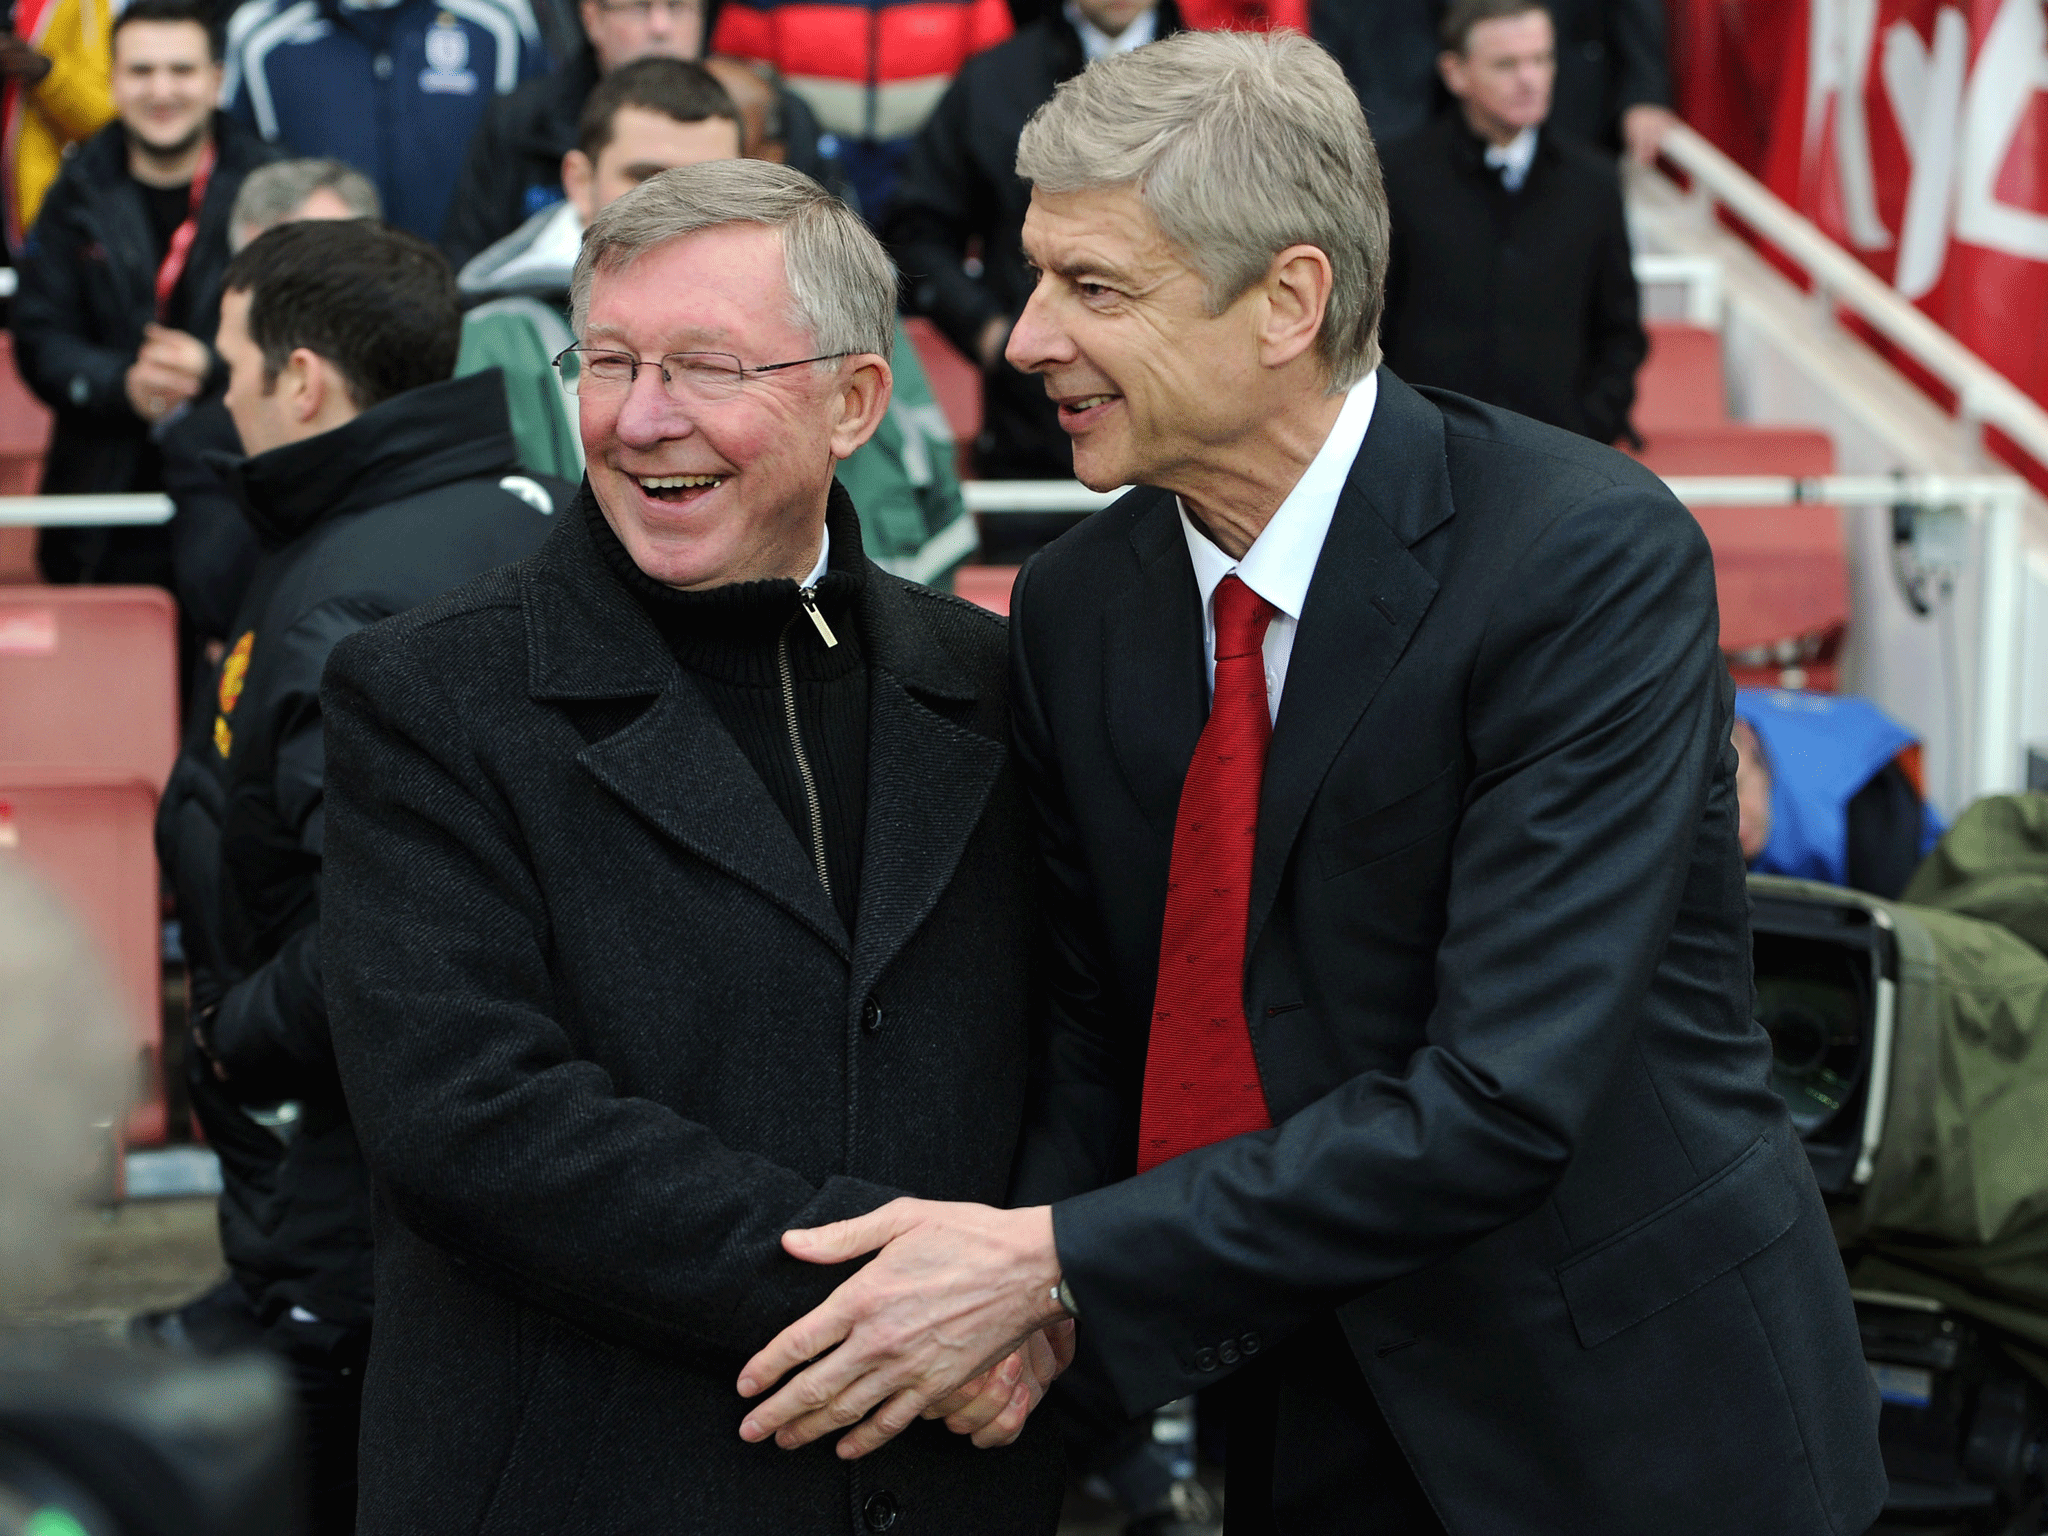 Arsene Wenger the Manager of Arsenal and Alex Ferguson the Manager of Manchester United shake hands